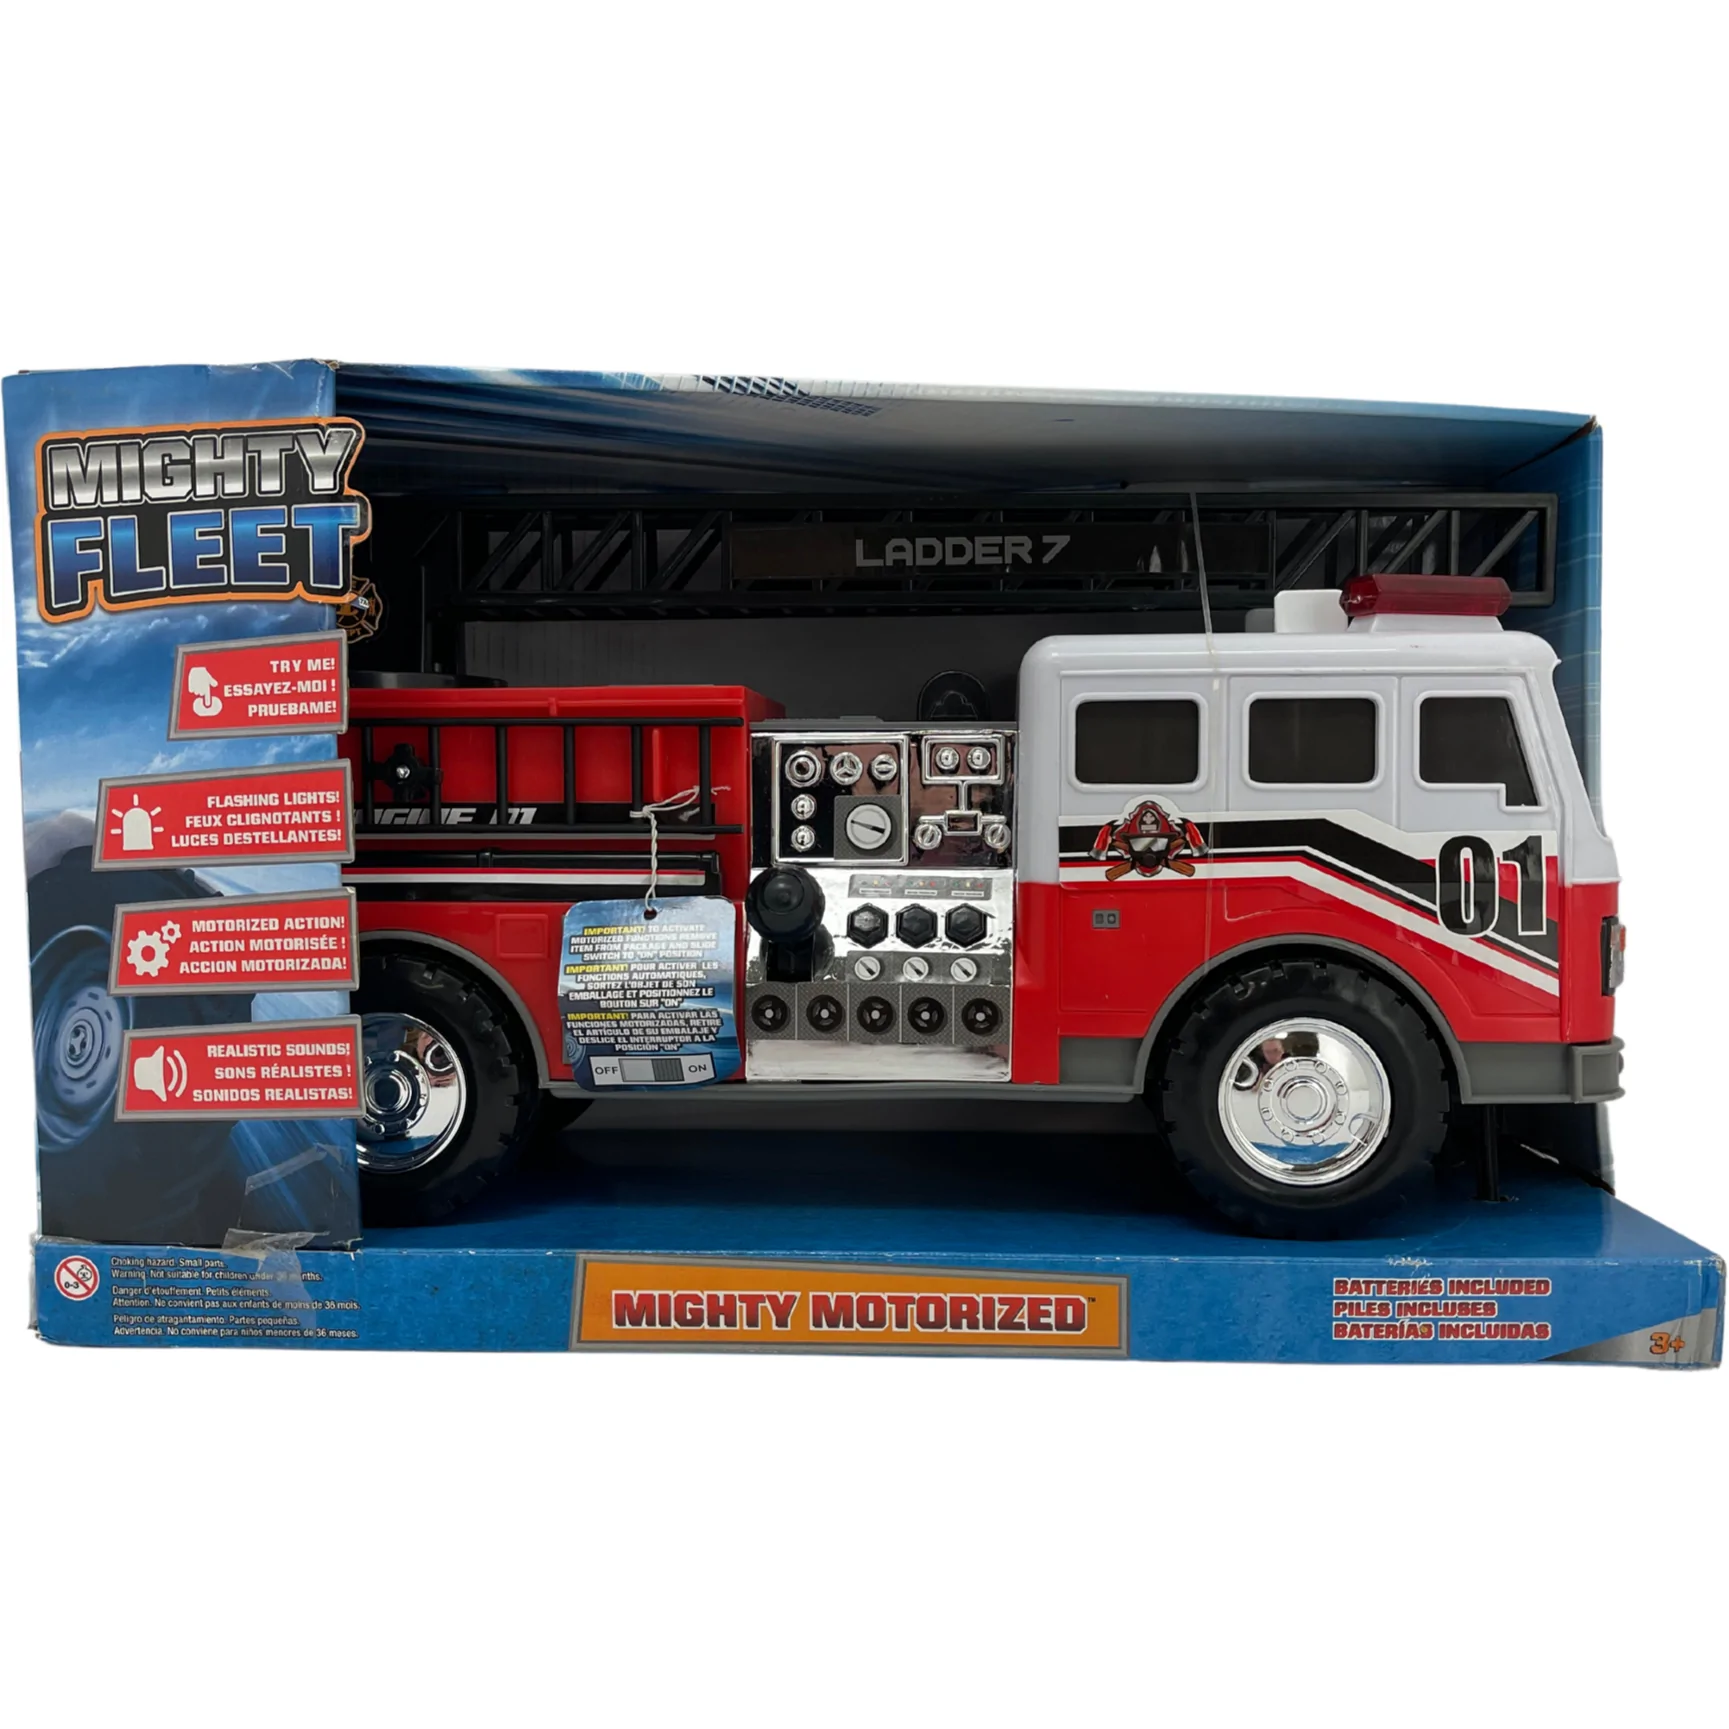 Mighty Fleet Fire Truck Toy / Mighty Motorized / Light & Sound / Red and White Fire Engine **DEALS**